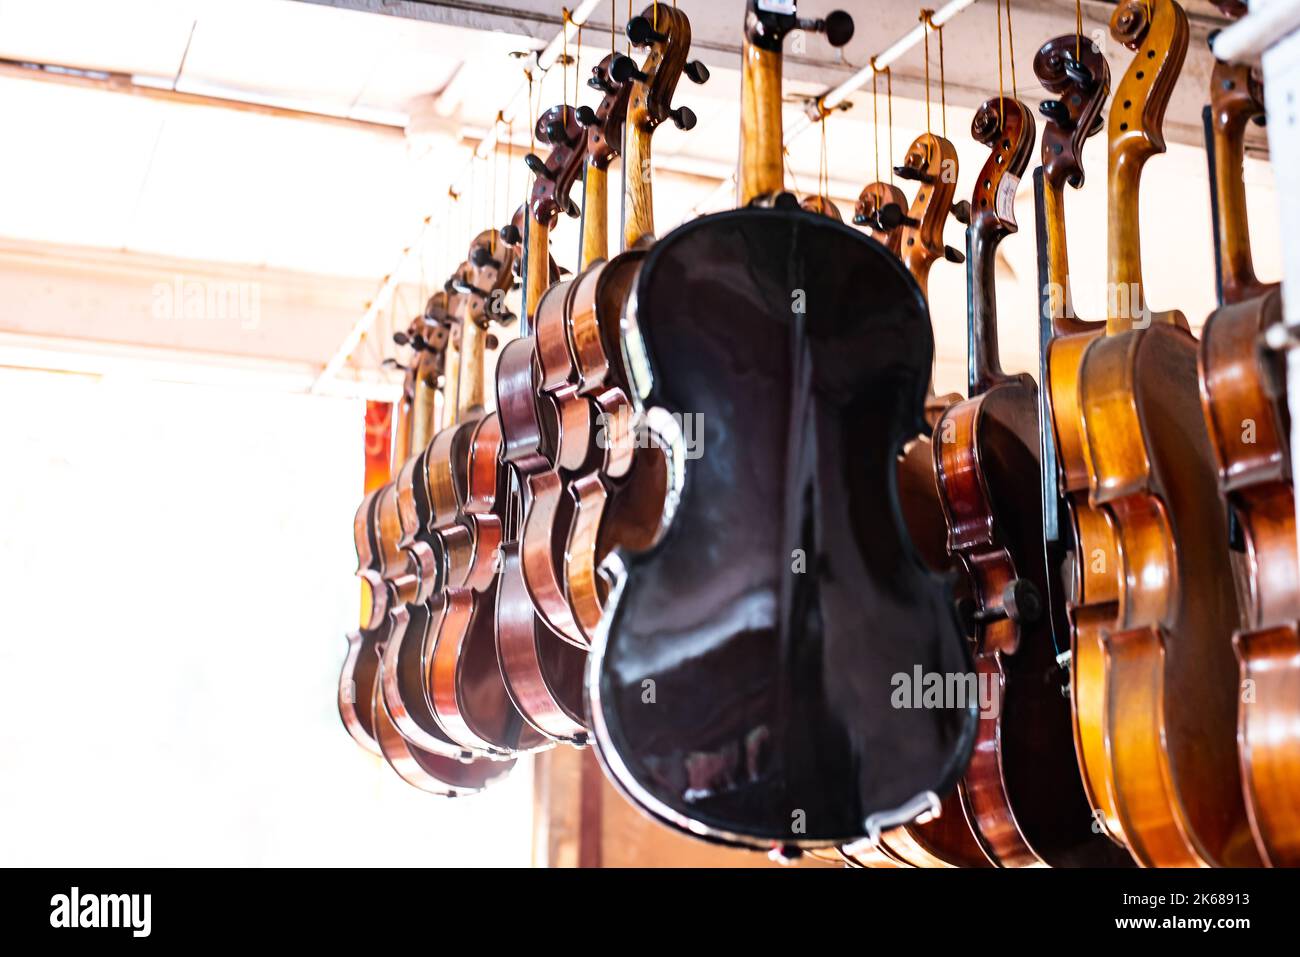 Violins are hanging in retail store to sell Stock Photo